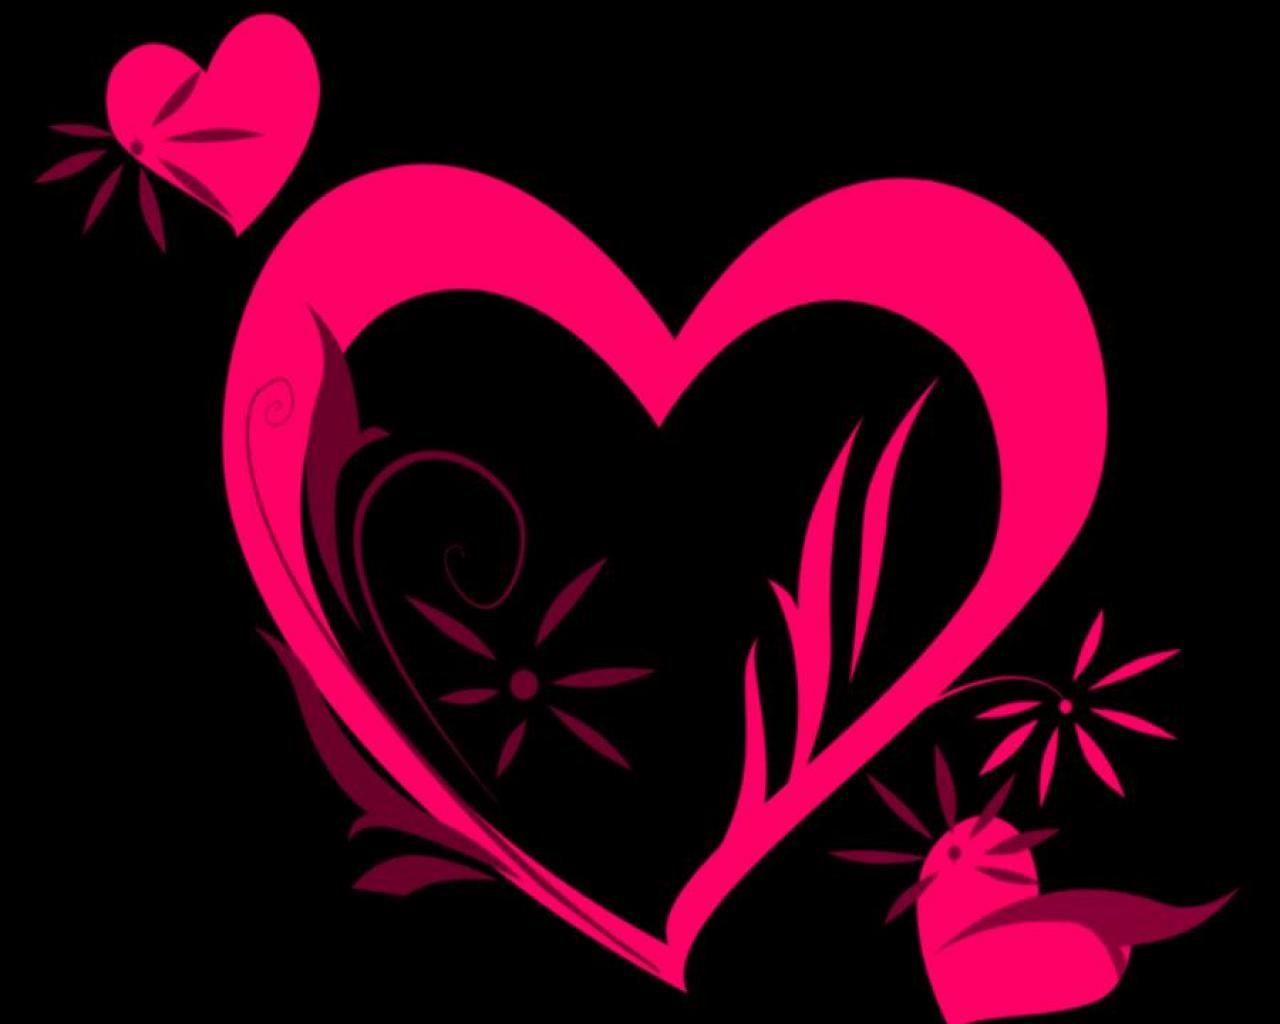 hot pink hearts - (#204) - HD Wallpapers - Abstract HQ Wallpapers ...